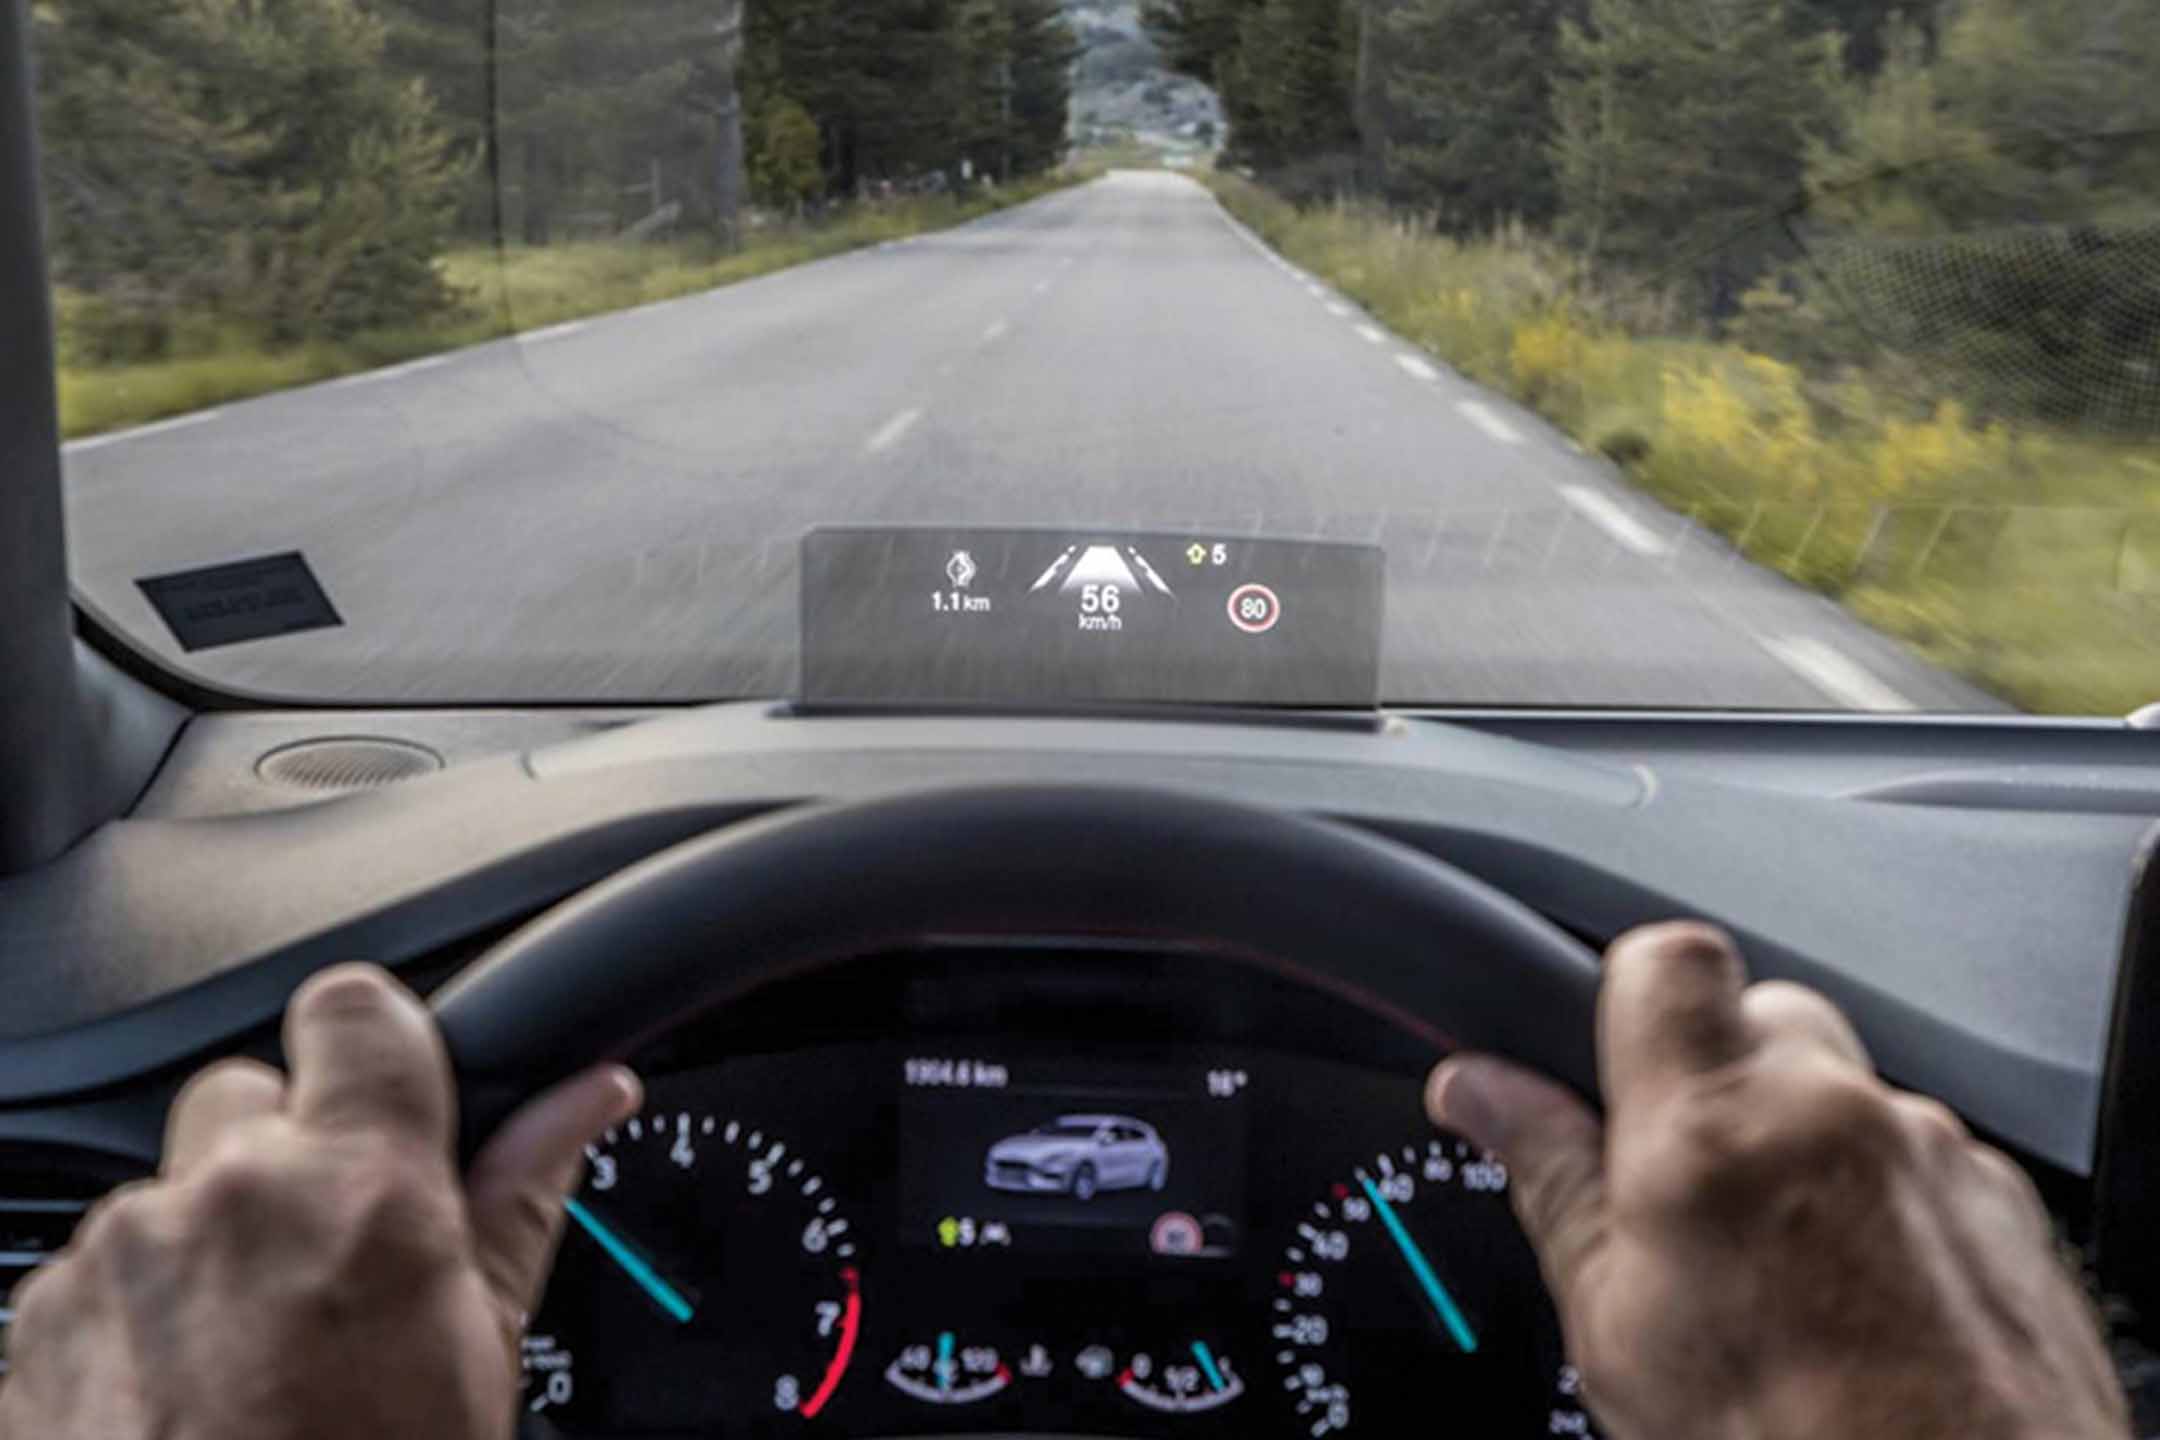 Driver viewing heads up display on a windshield